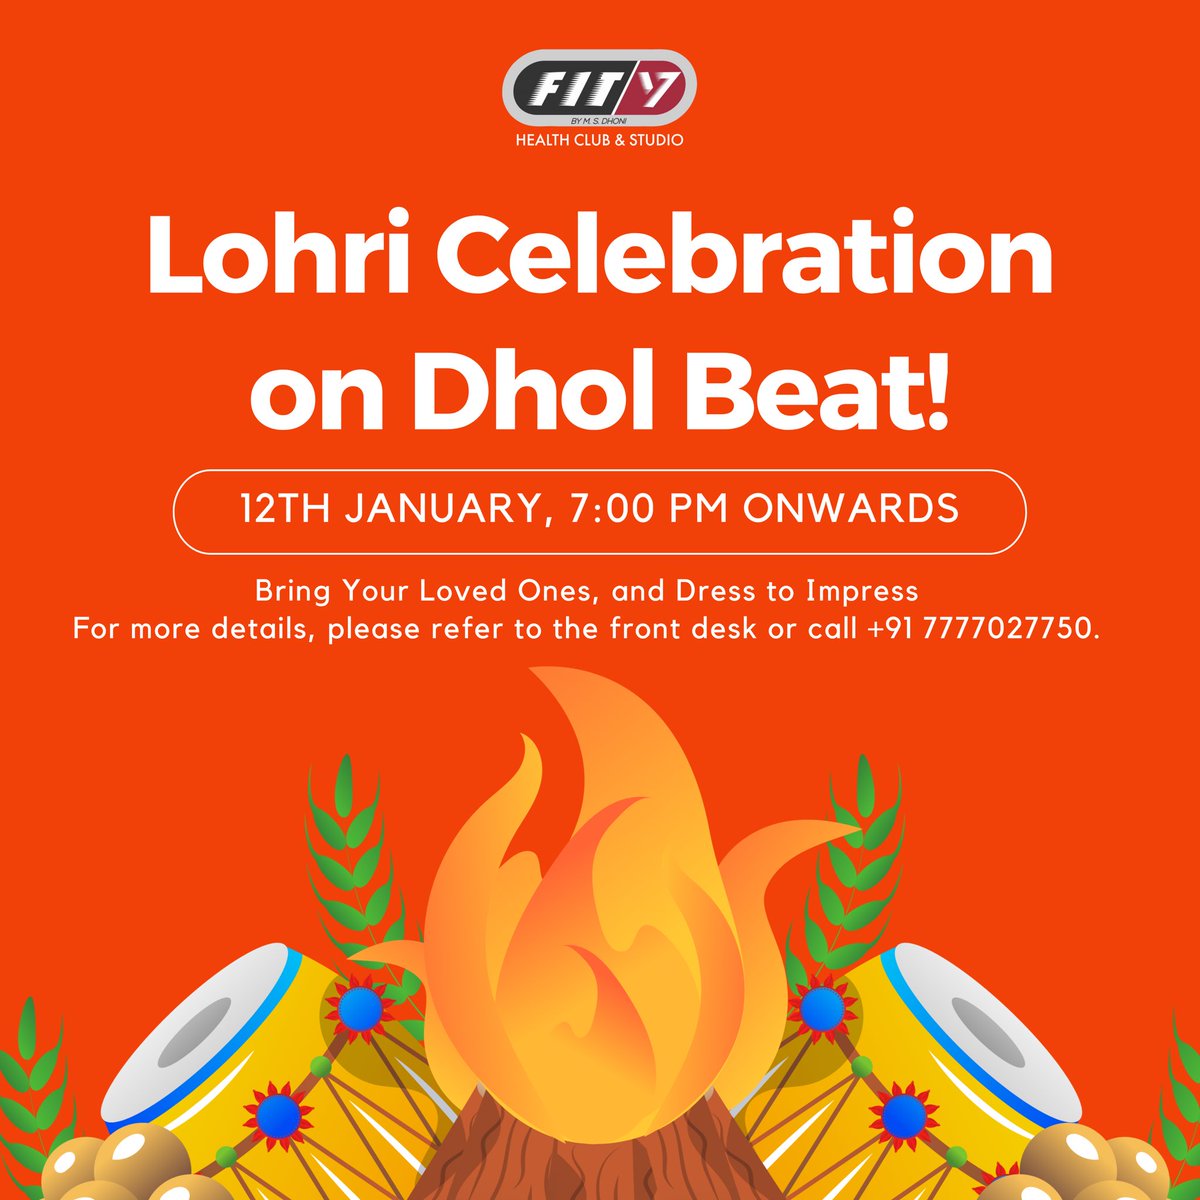 Get Ready to Celebrate Lohri at @fit7vasantkunj with Dhol Beats and Bhangra! 
🎉 Bring your loved ones! 👨‍👩‍👦
—
For more details, please refer to the front desk or Call +91 7777027750.
—
#Lohri #lohricelebration #fit7vasantkunj #dholbeats #bhangra #vasantkunj